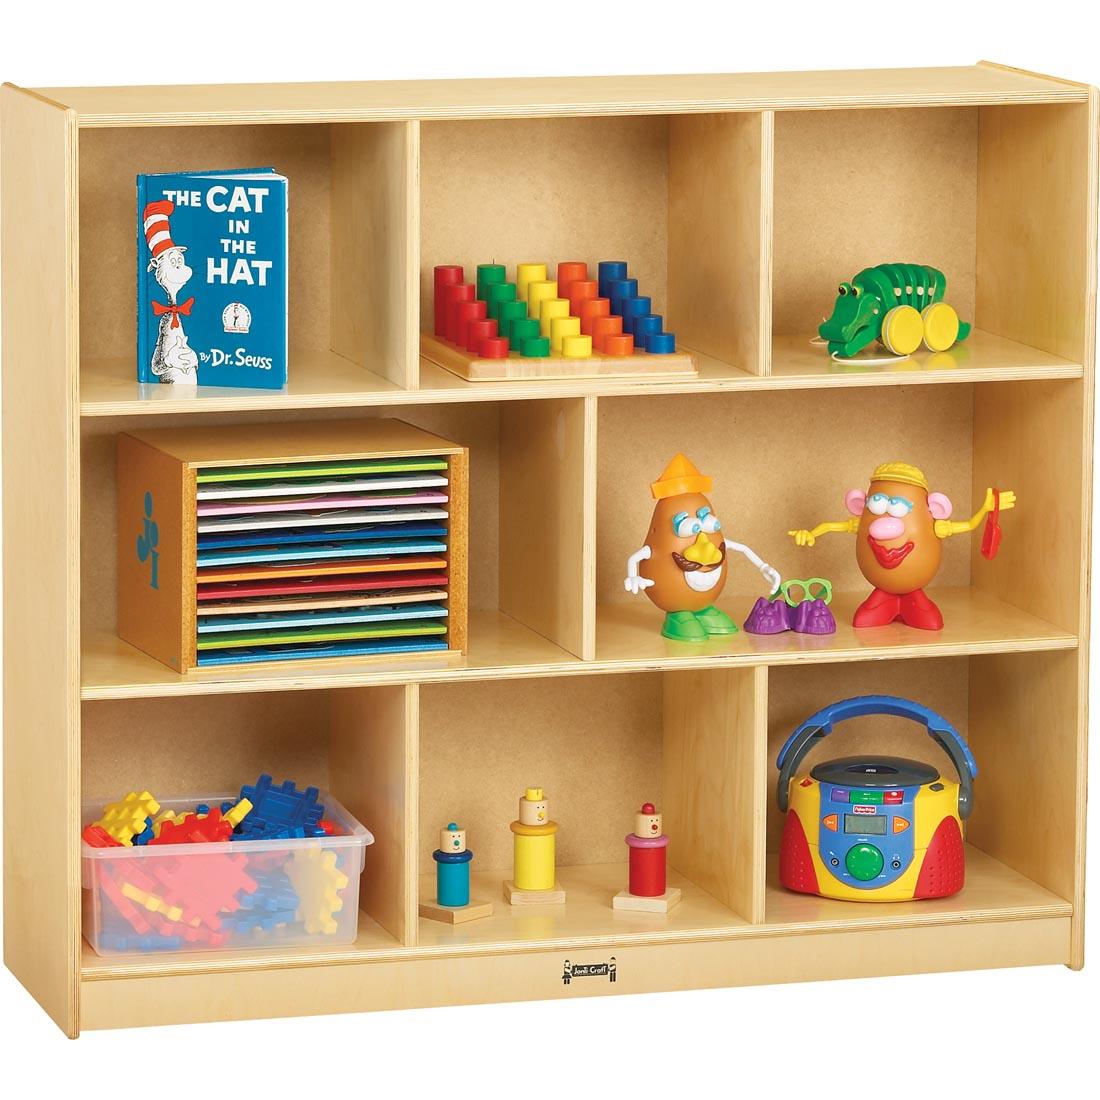 Birch Mega Storage Unit shown with suggested storage contents